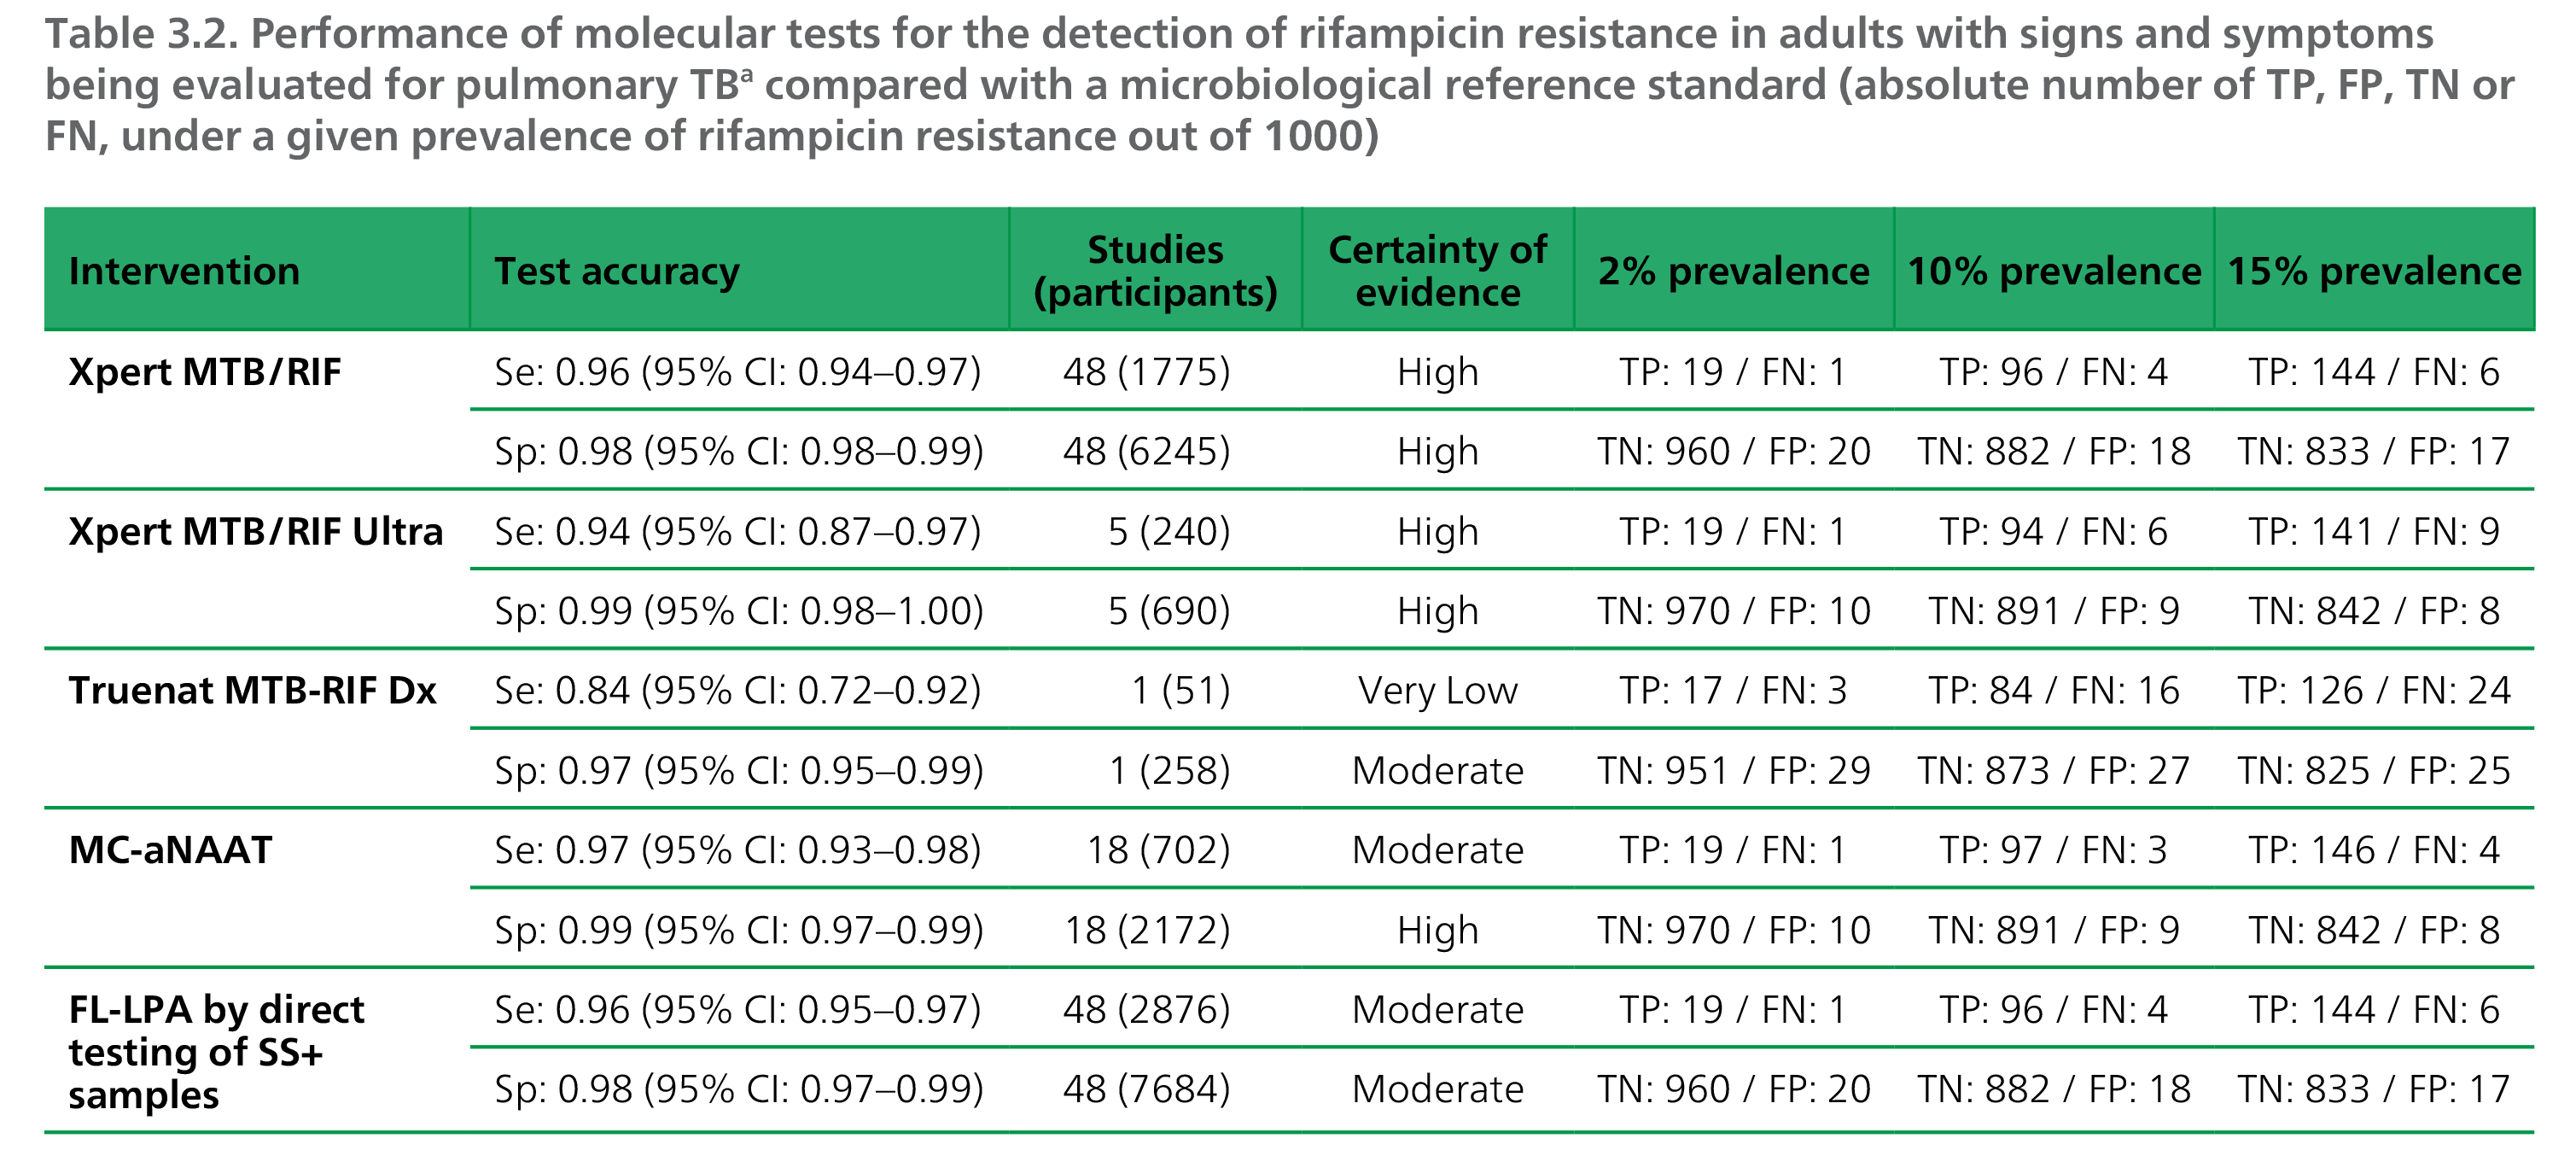 Performance of molecular tests for the detection of rifampicin resistance